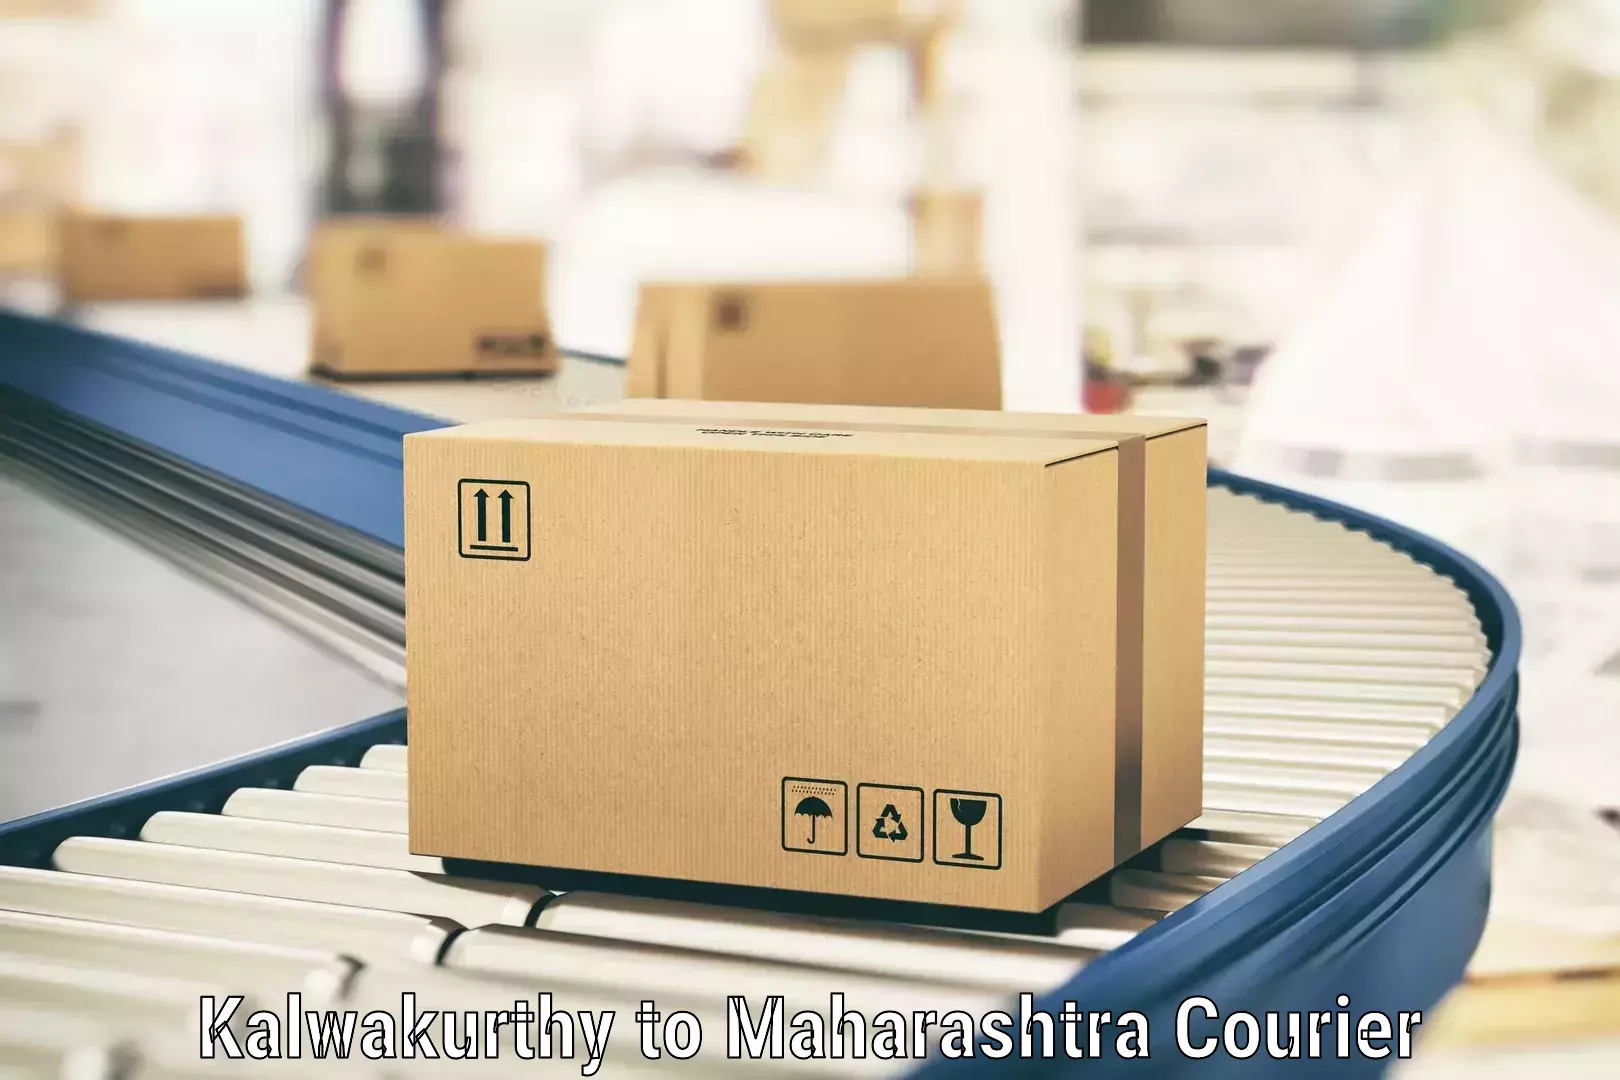 Large package courier Kalwakurthy to Kudus